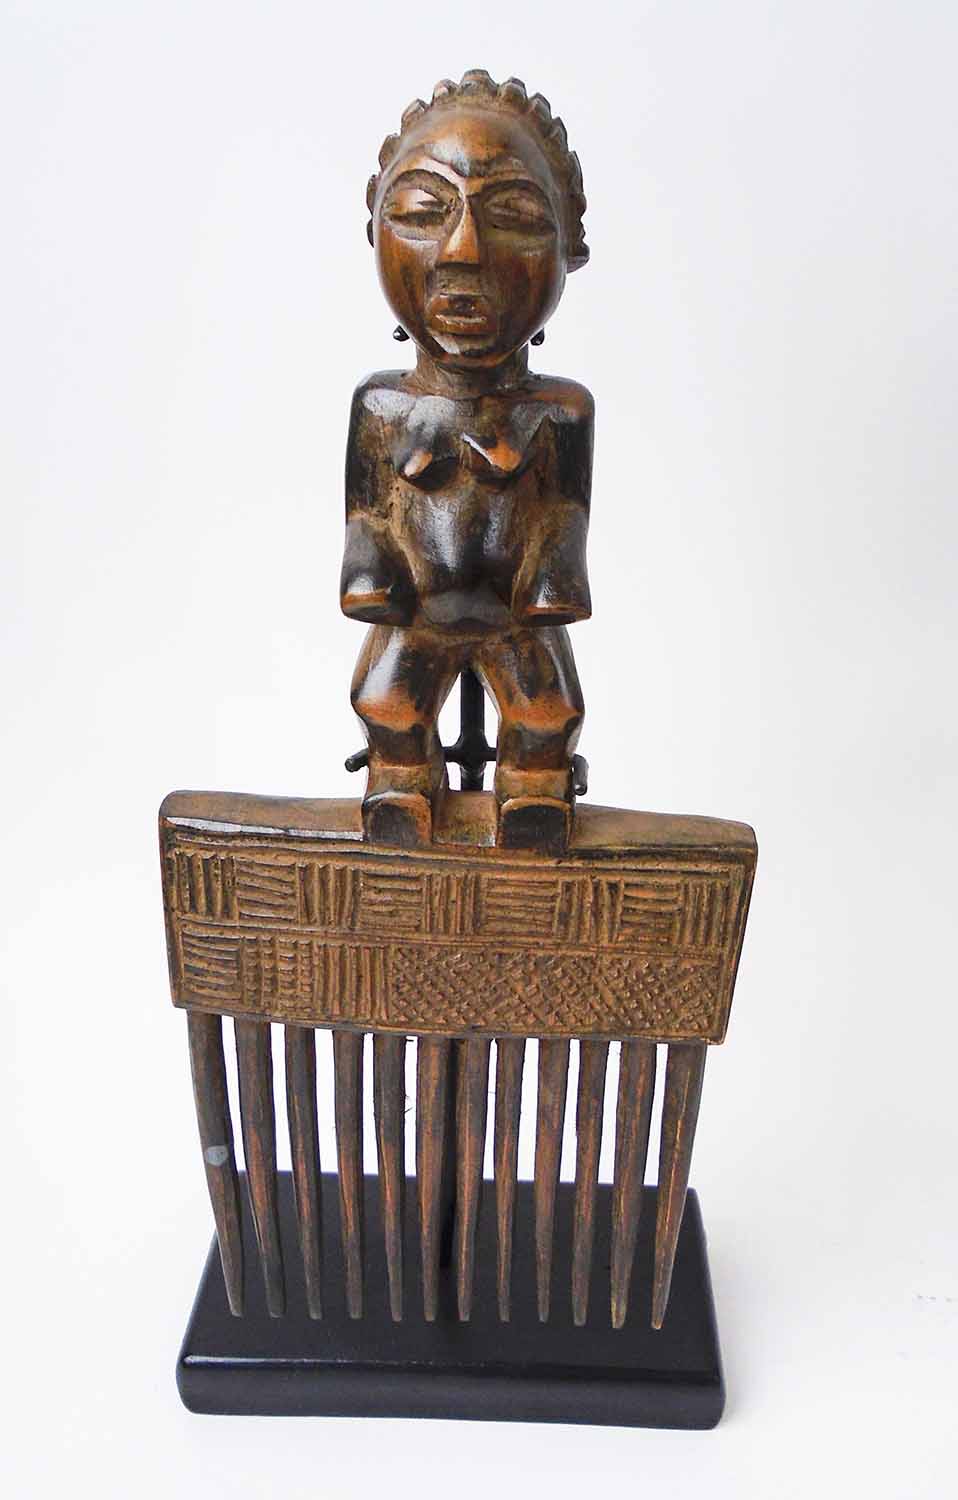 FOUR VARIOUS DECORATIVE COMBS, Cote d'Ivoire, carved wood, each approx. 27cm H, plus display stands. - Image 5 of 5